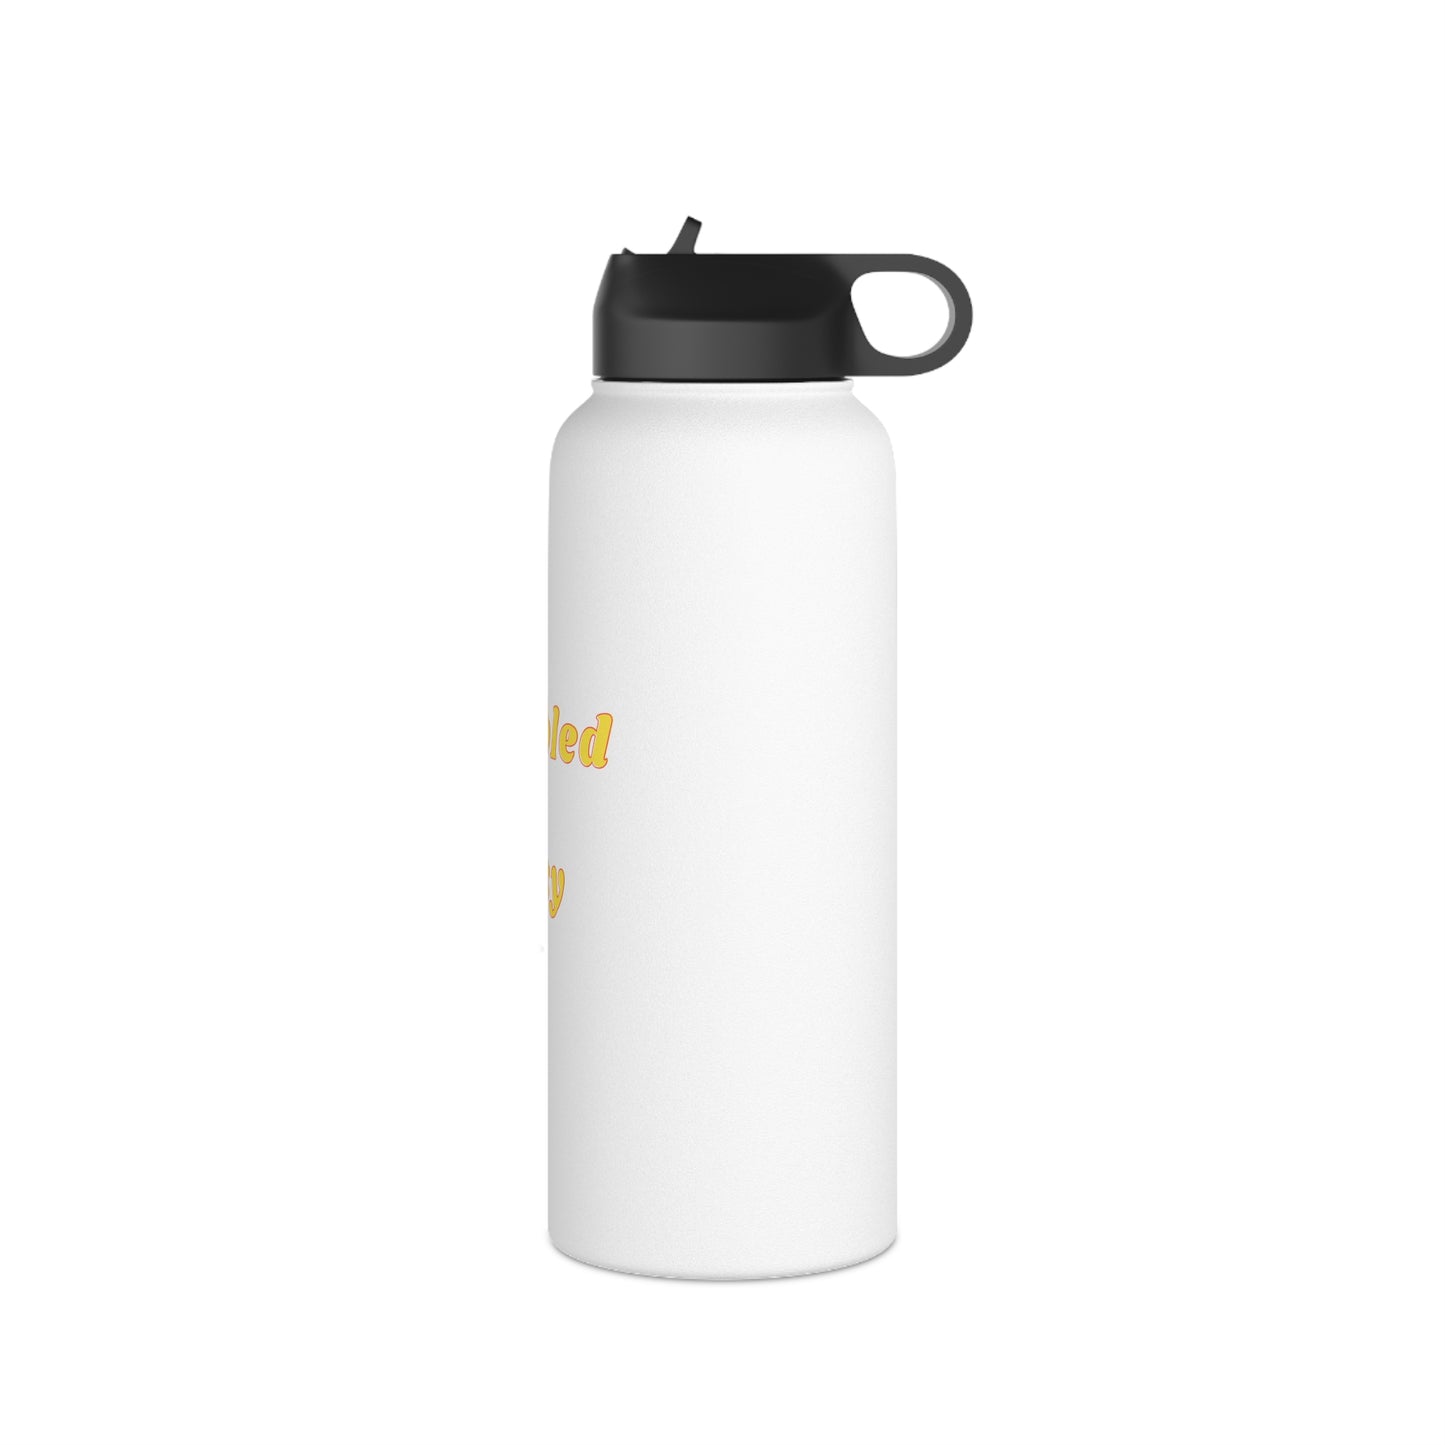 Disabled ≠ Lazy - Stainless Steel Water Bottle